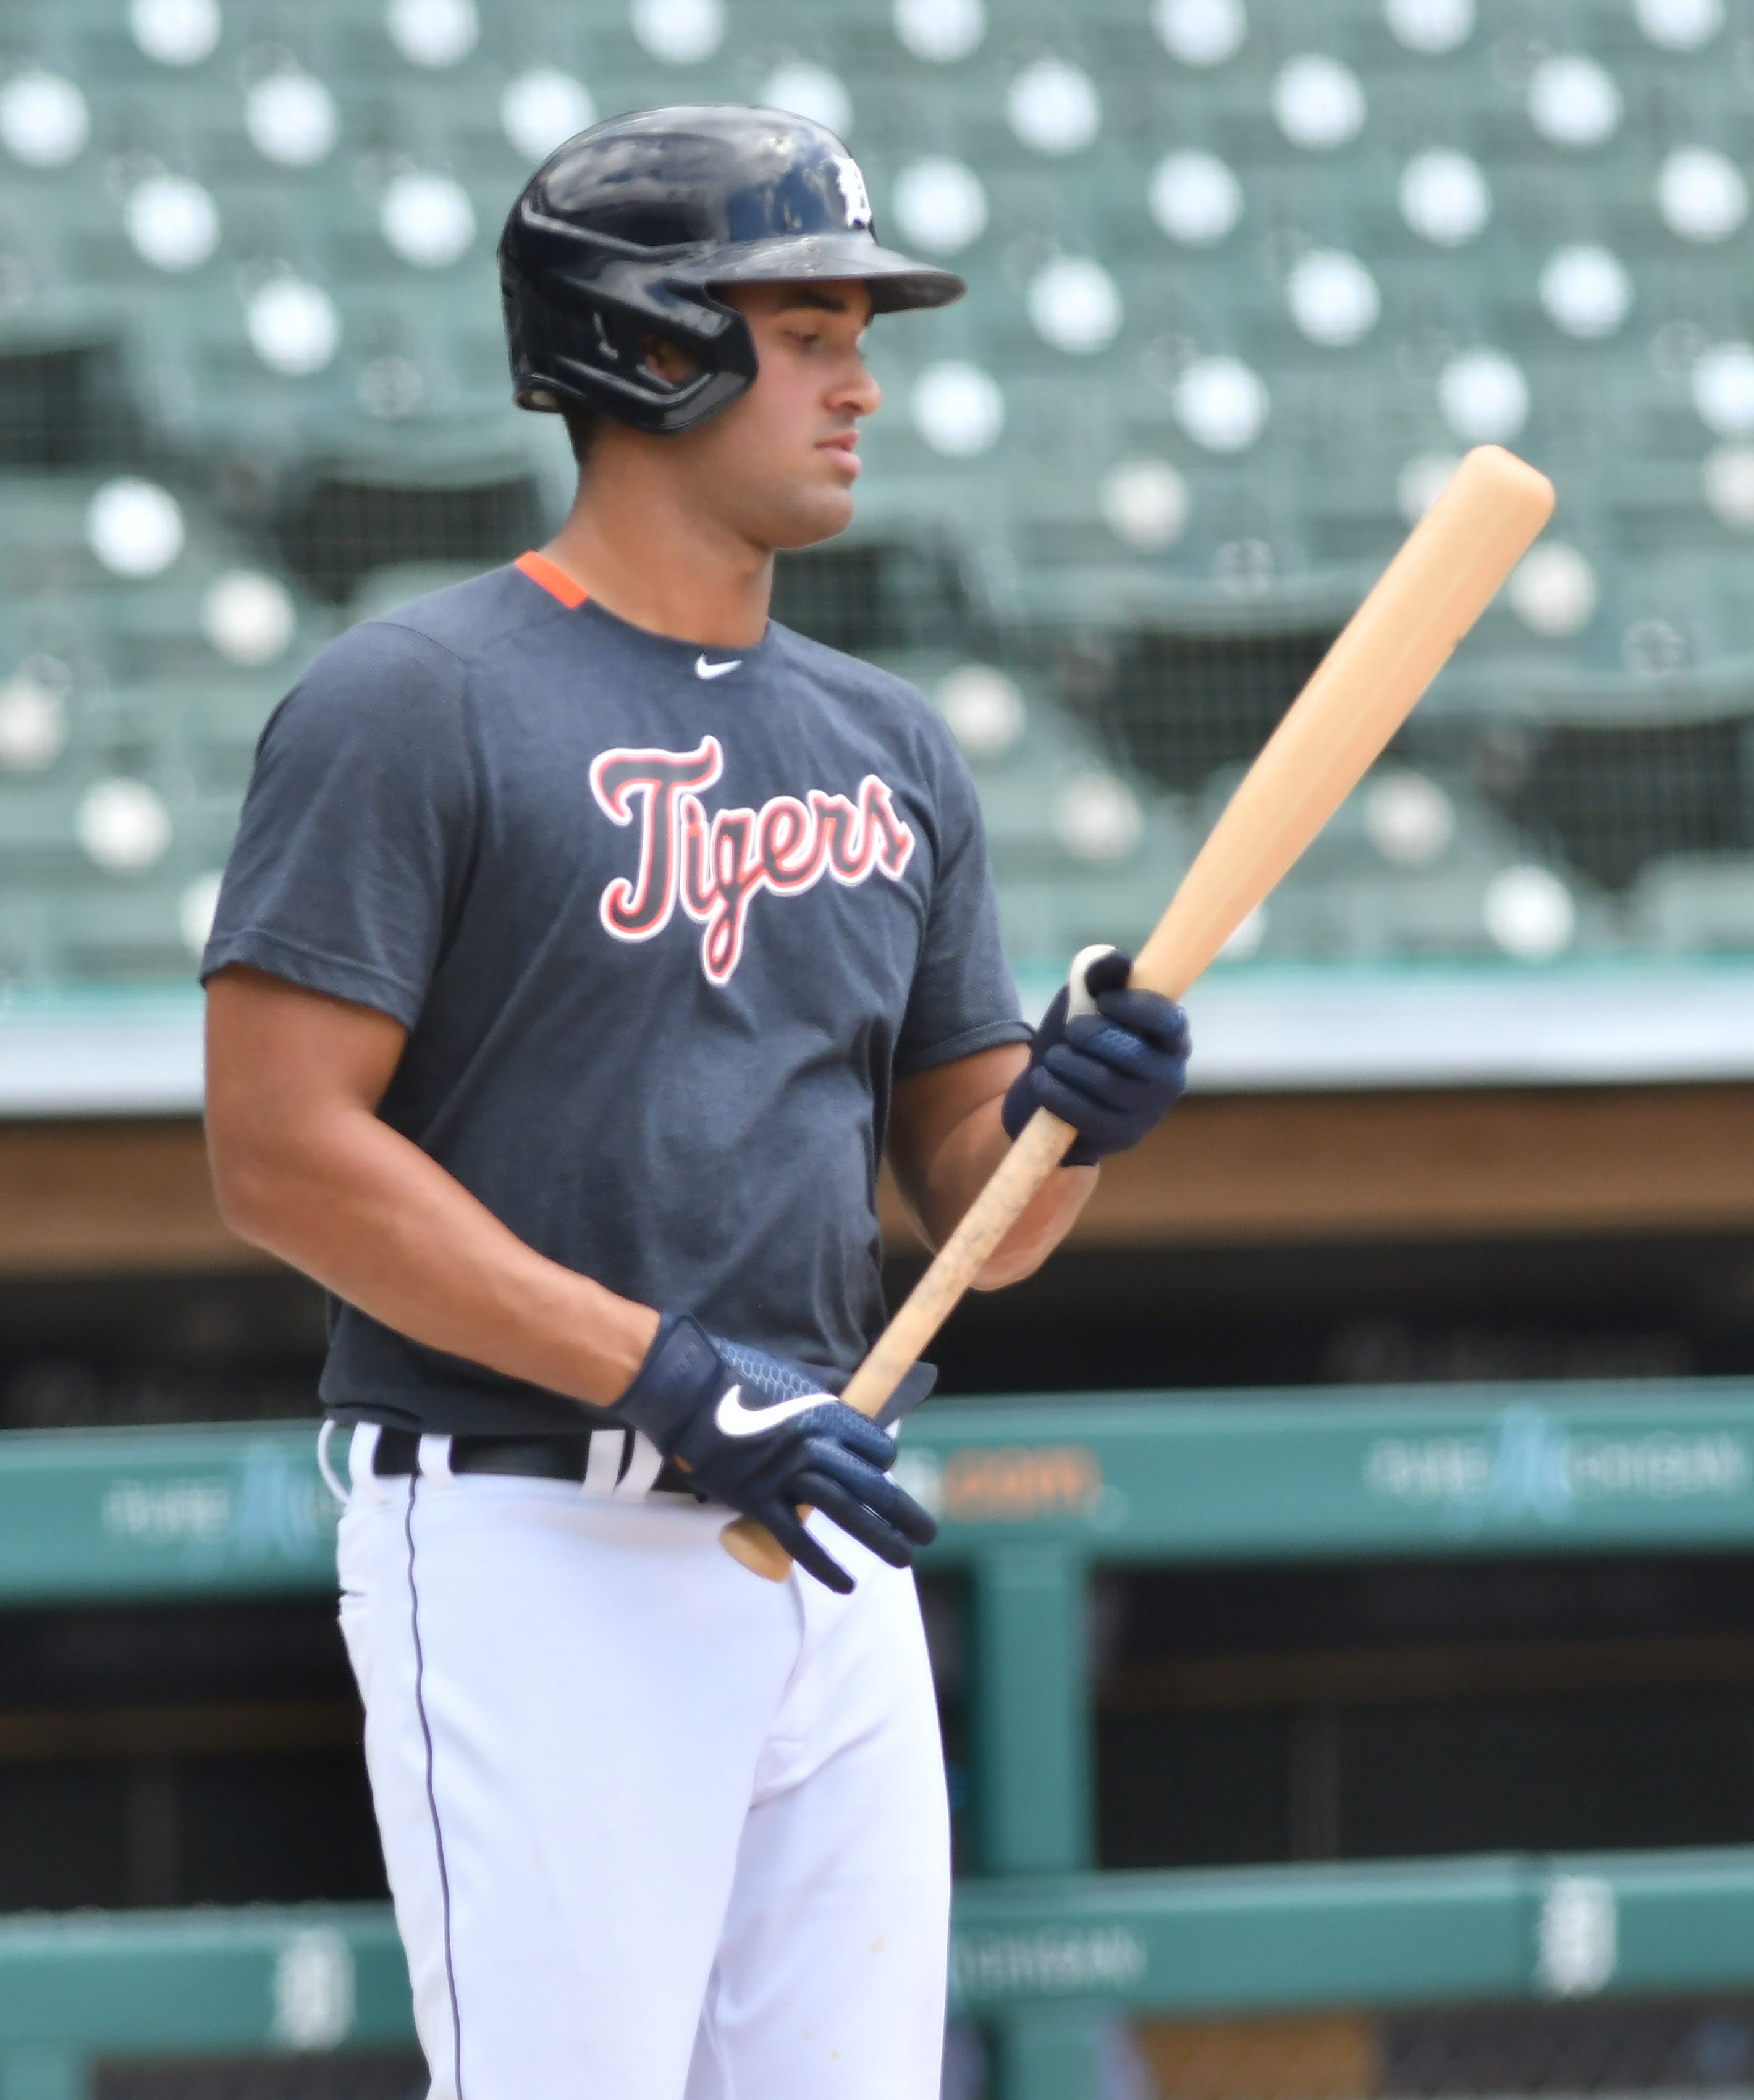 Non-roster invitee Riley Greene checks out his bat during live batting practice.